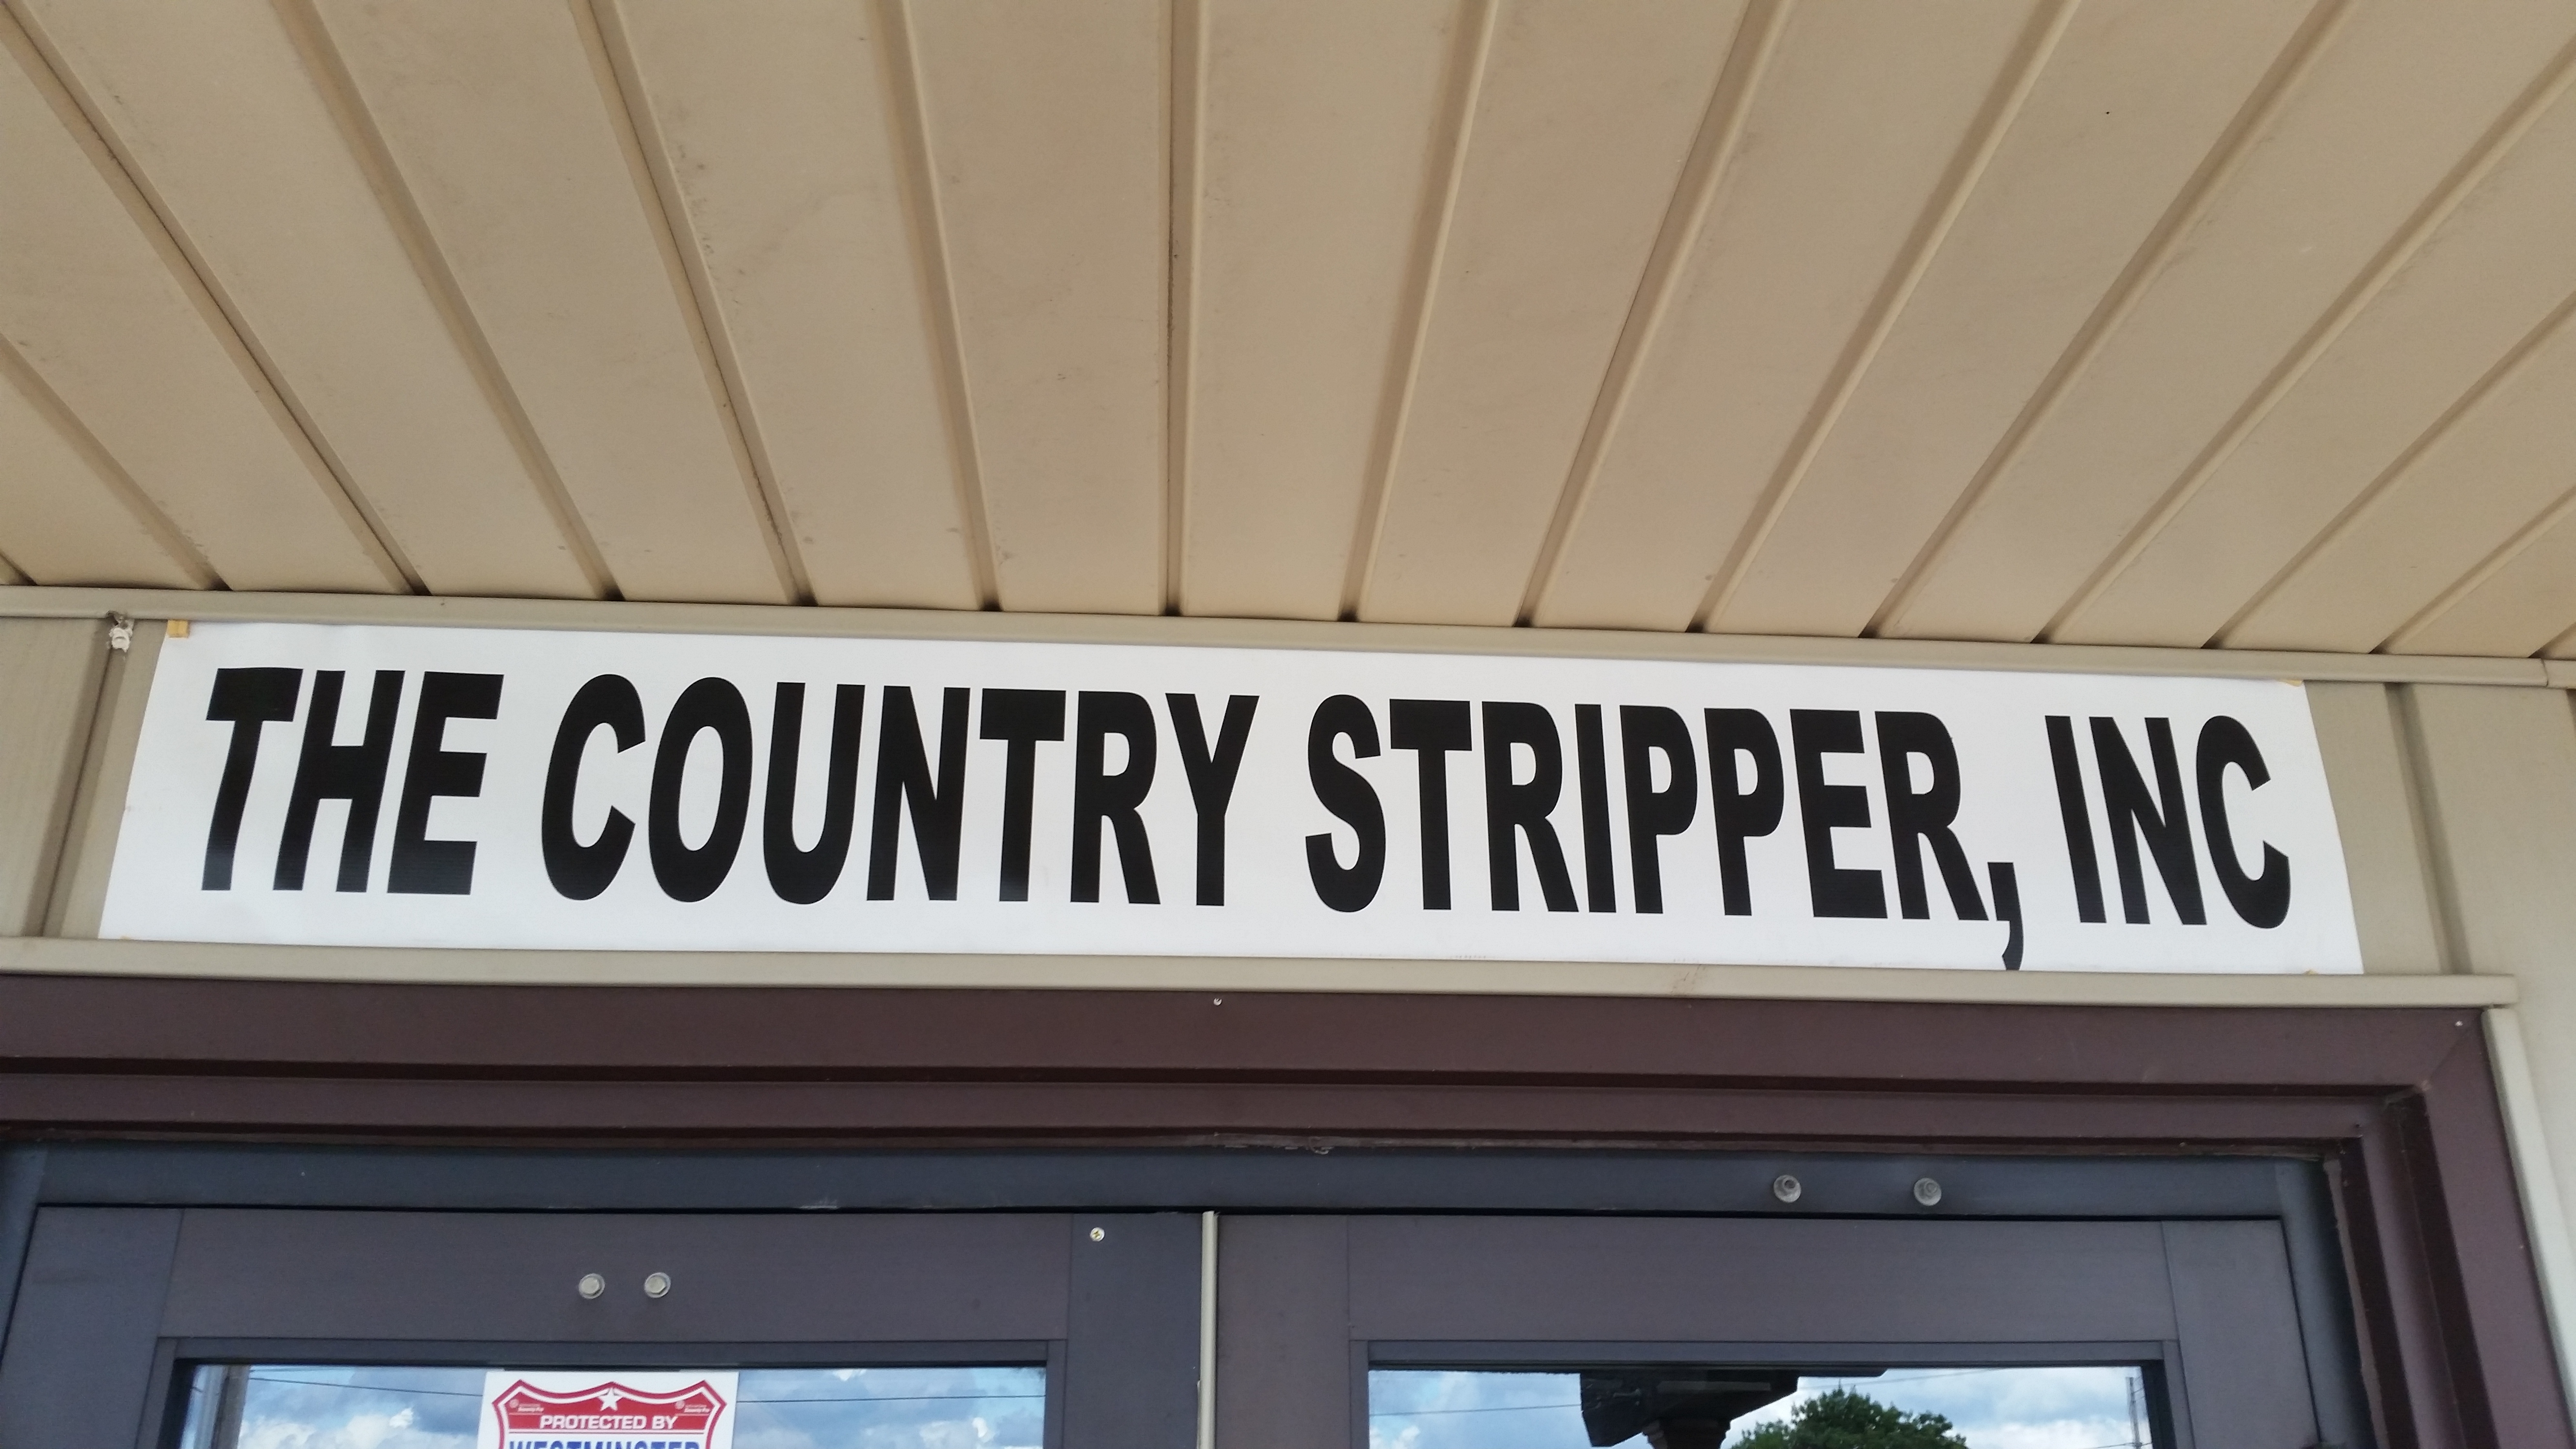 The Country Stripper, Inc. Logo